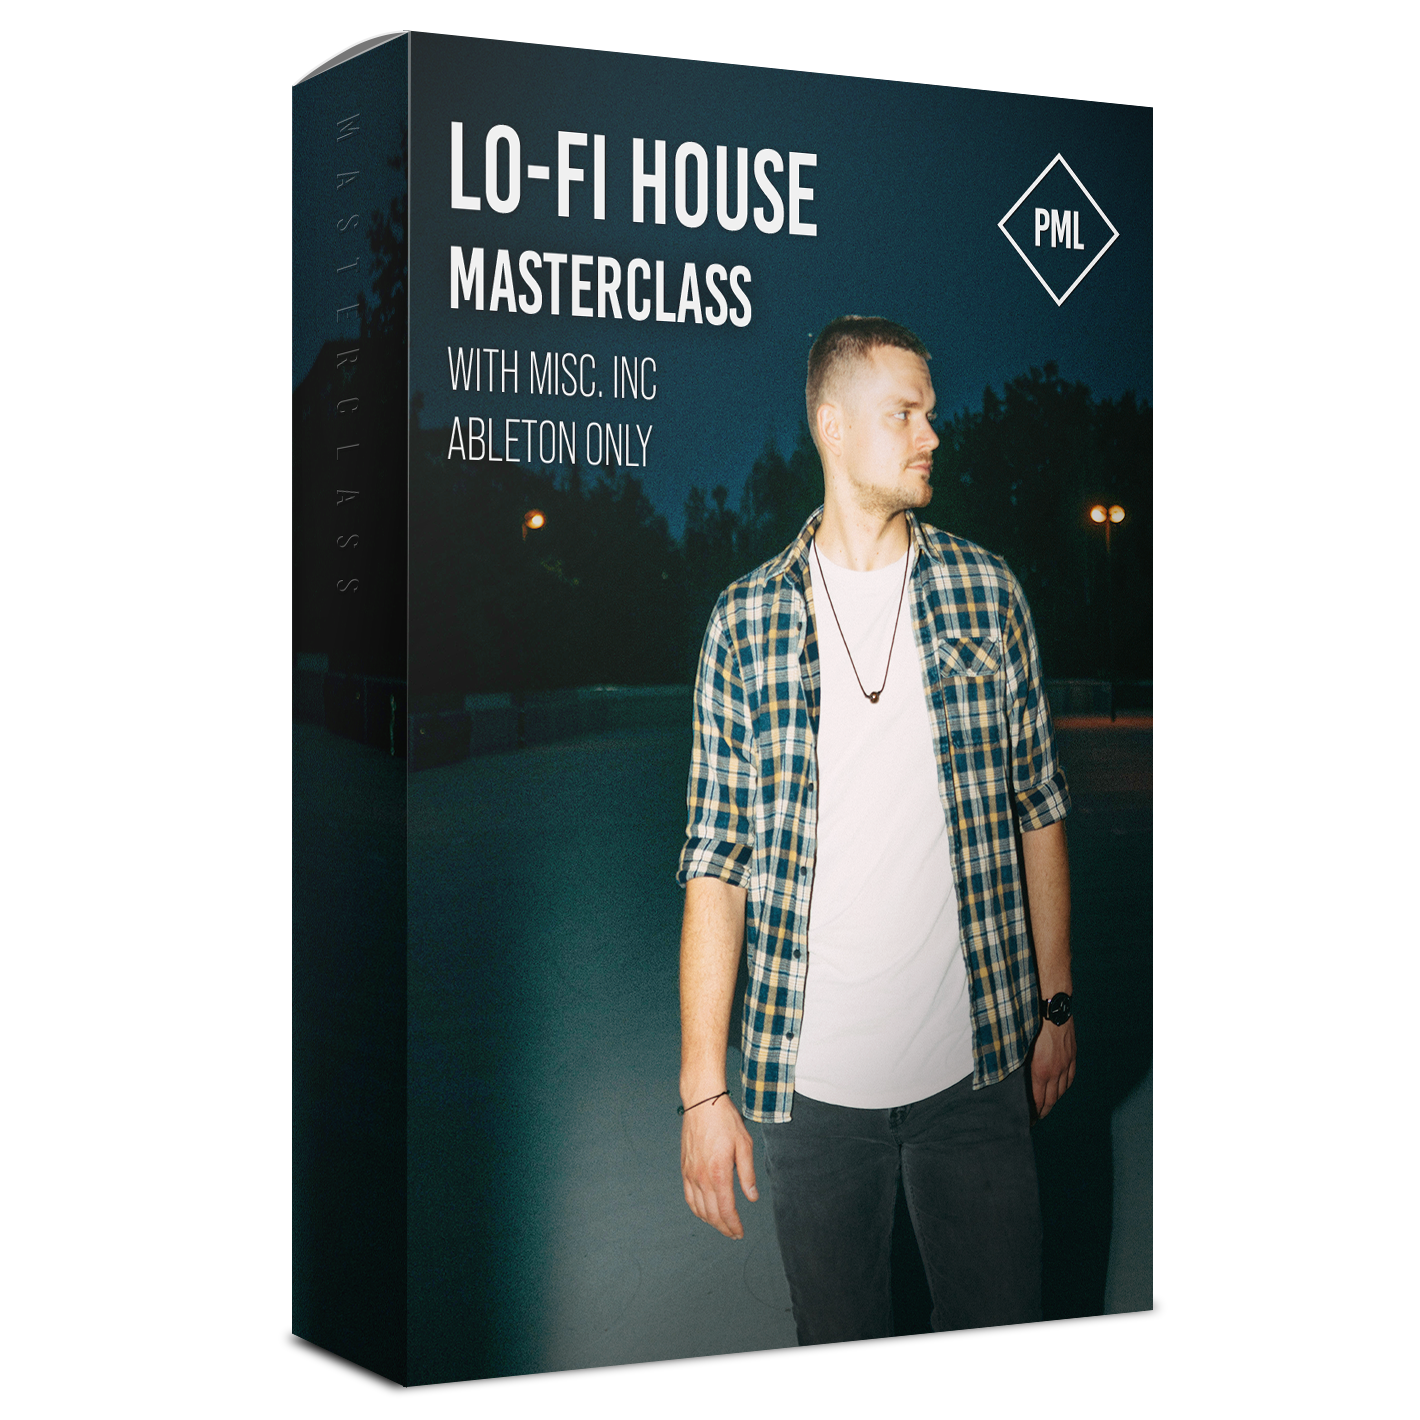 Masterclass: Lo-Fi House Track from Start to Finish (with Misc.Inc)